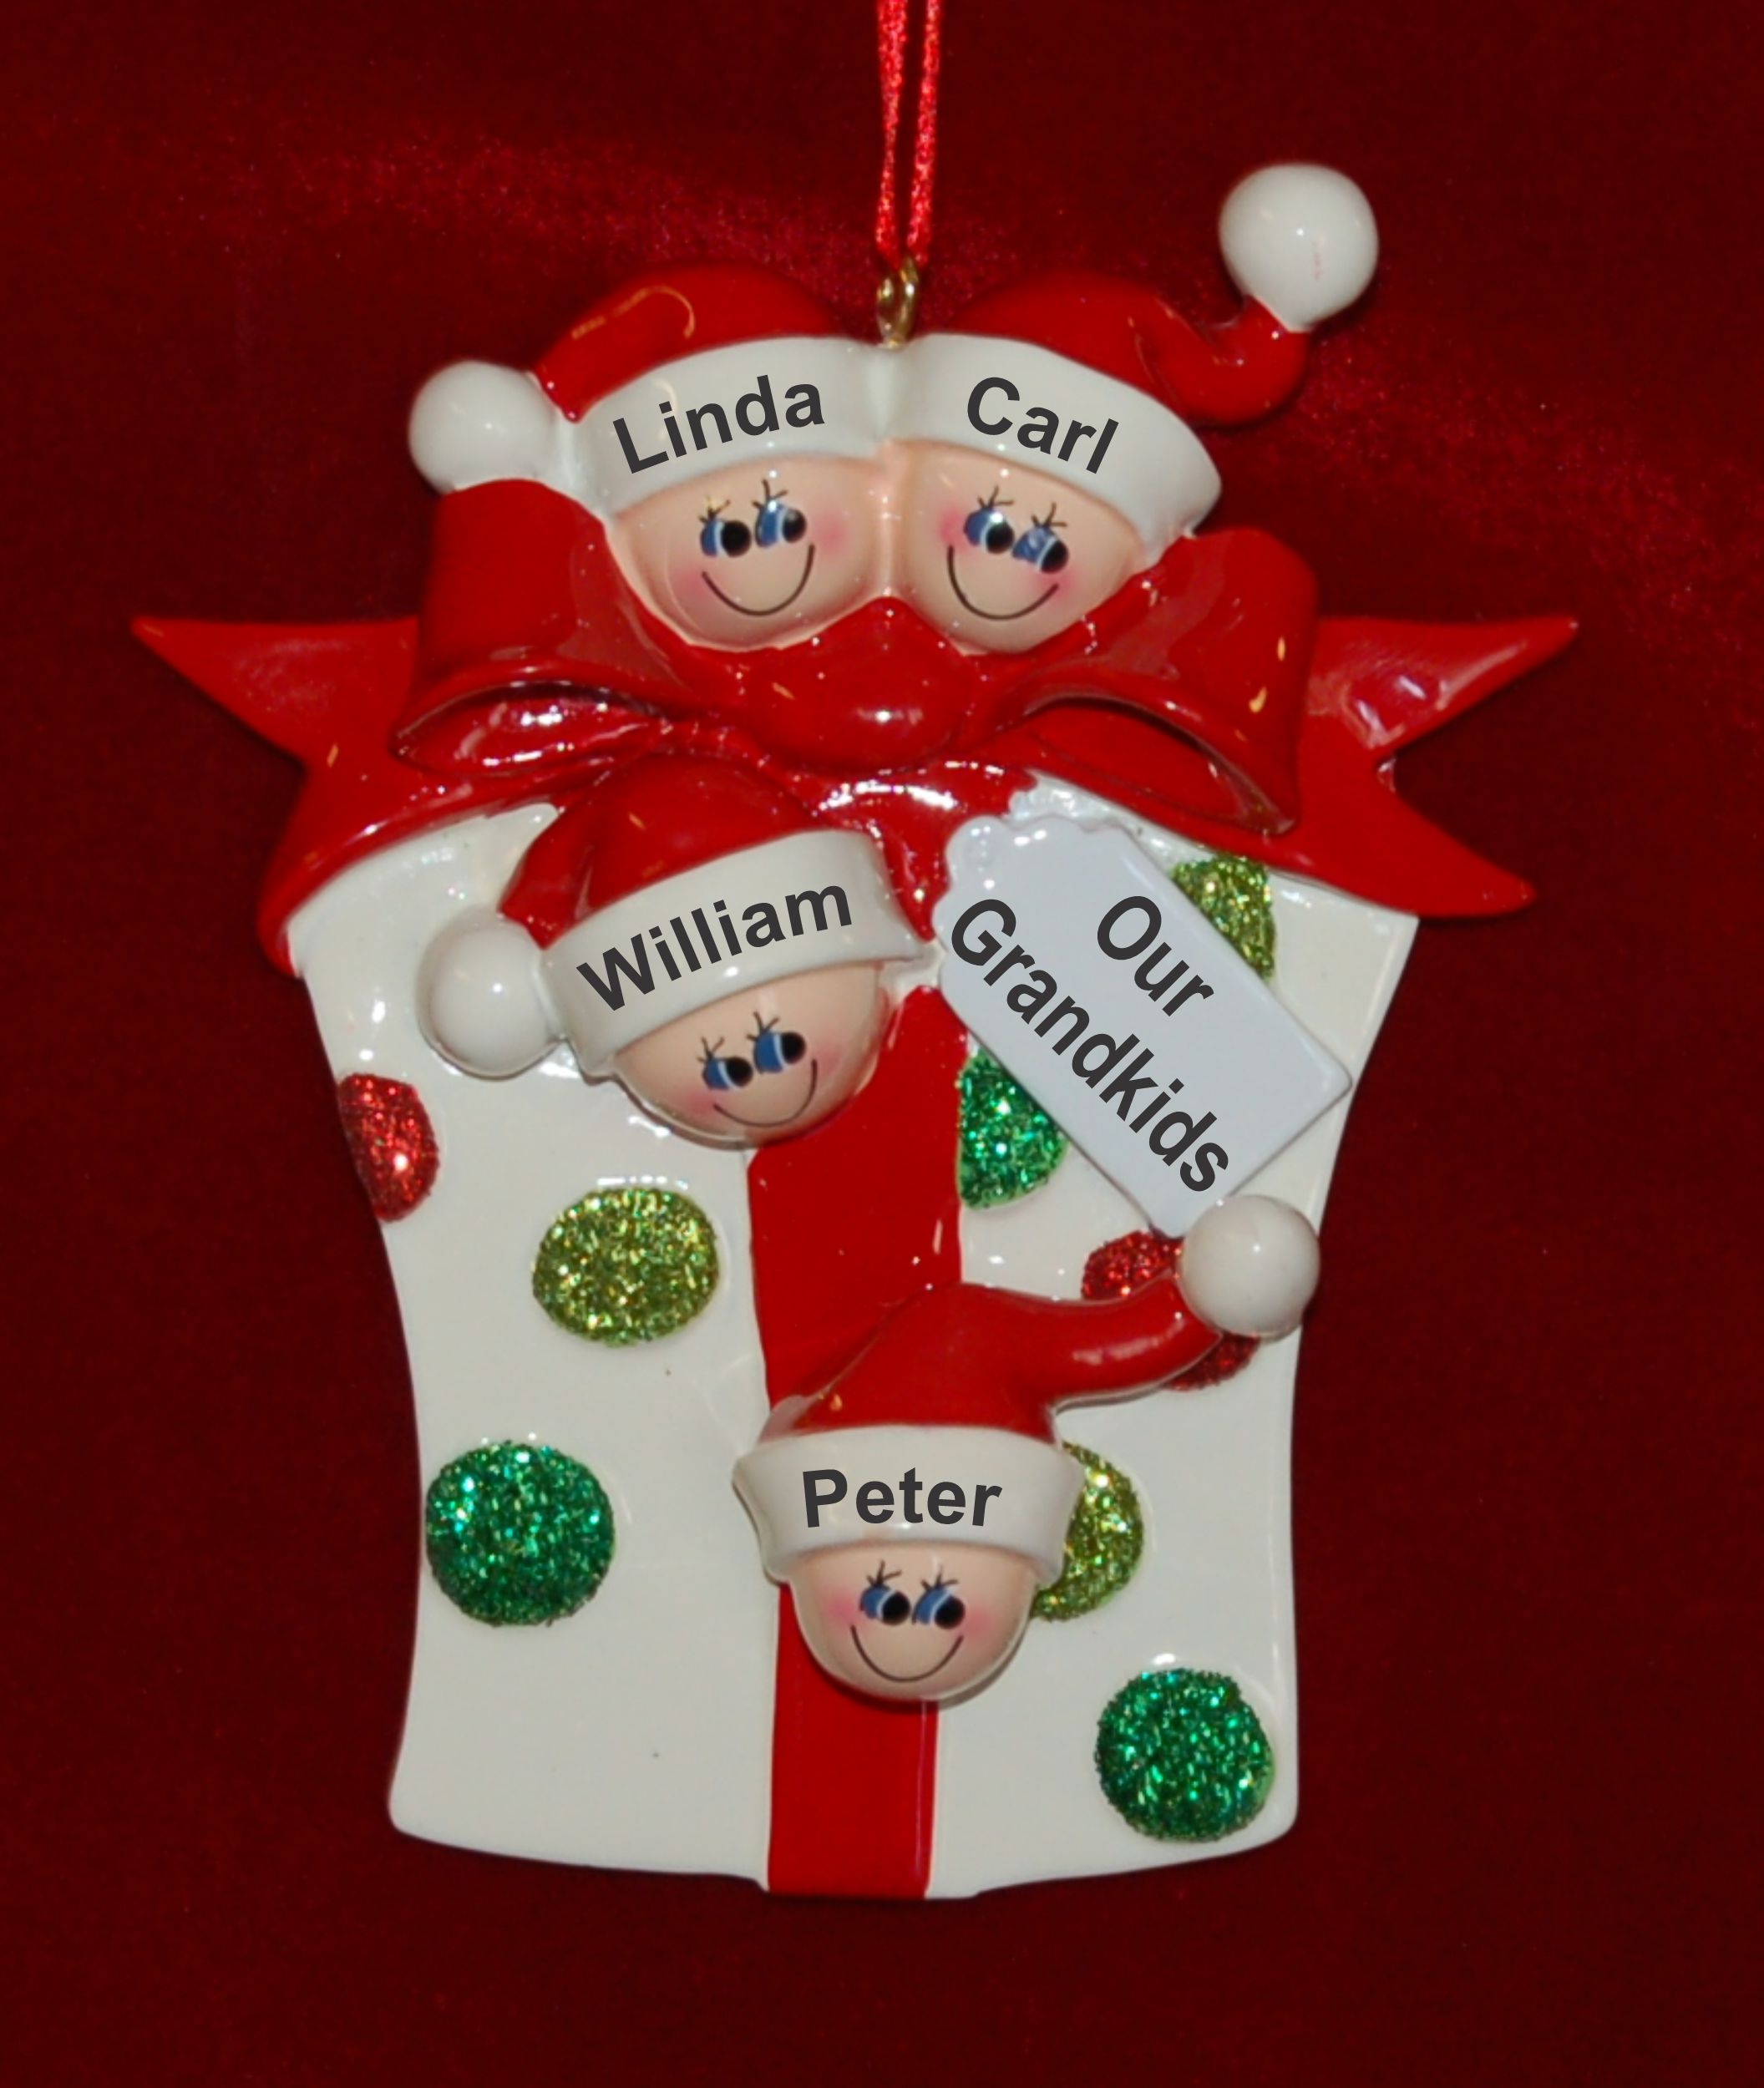 Grandparents Christmas Ornament Xmas Gift 4 Grandkids Personalized by RussellRhodes.com